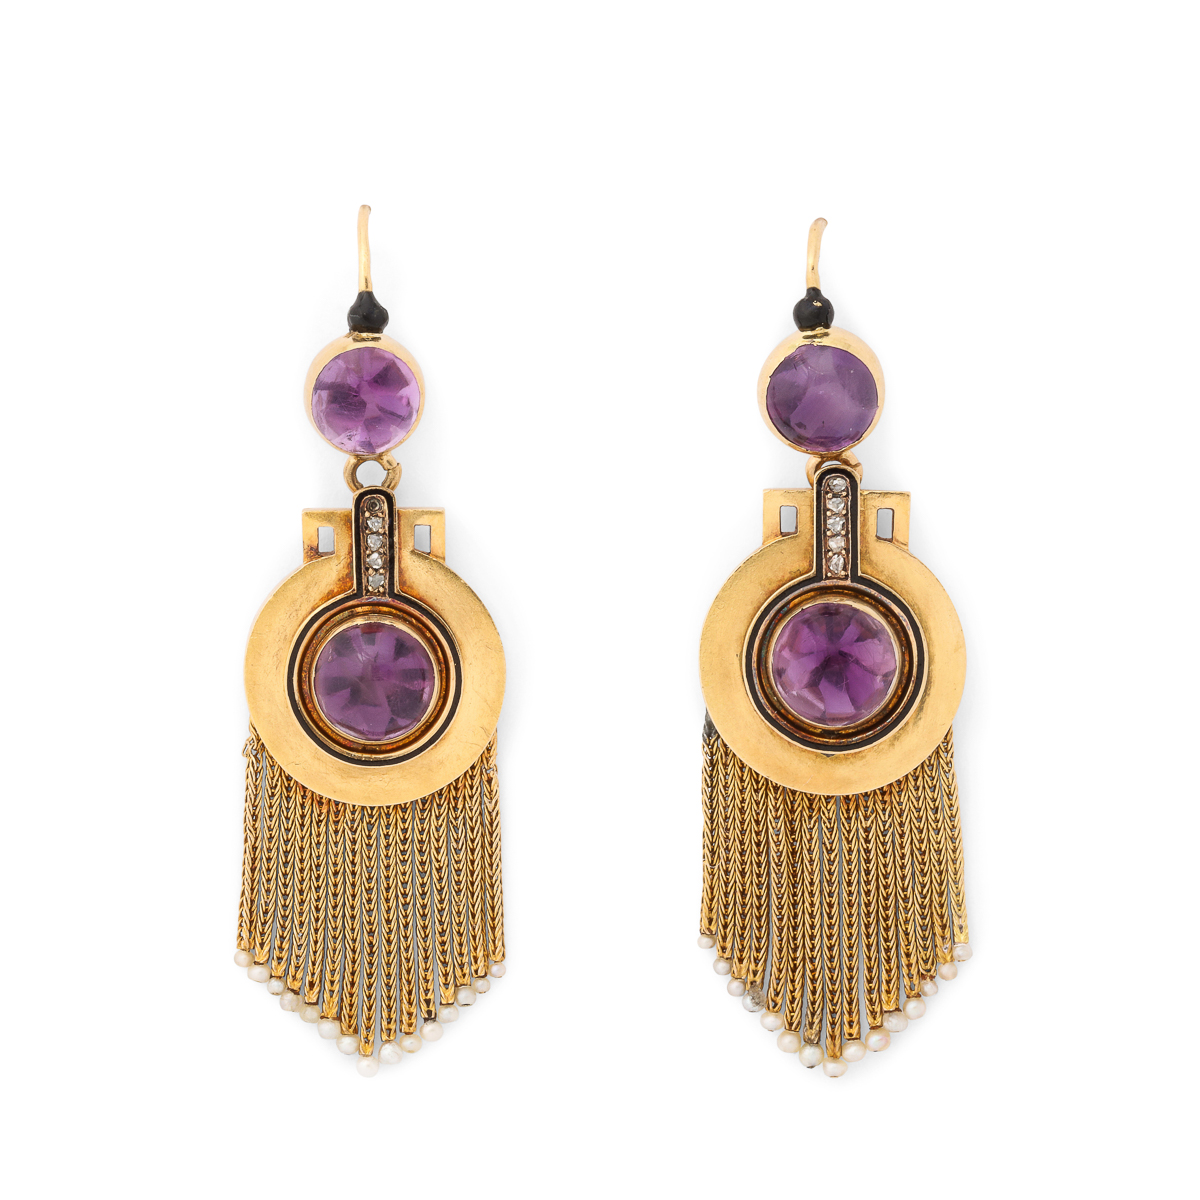 main view of gold, amethyst, diamond, and black enamel pendant earrings with gold and natural pearl fringe